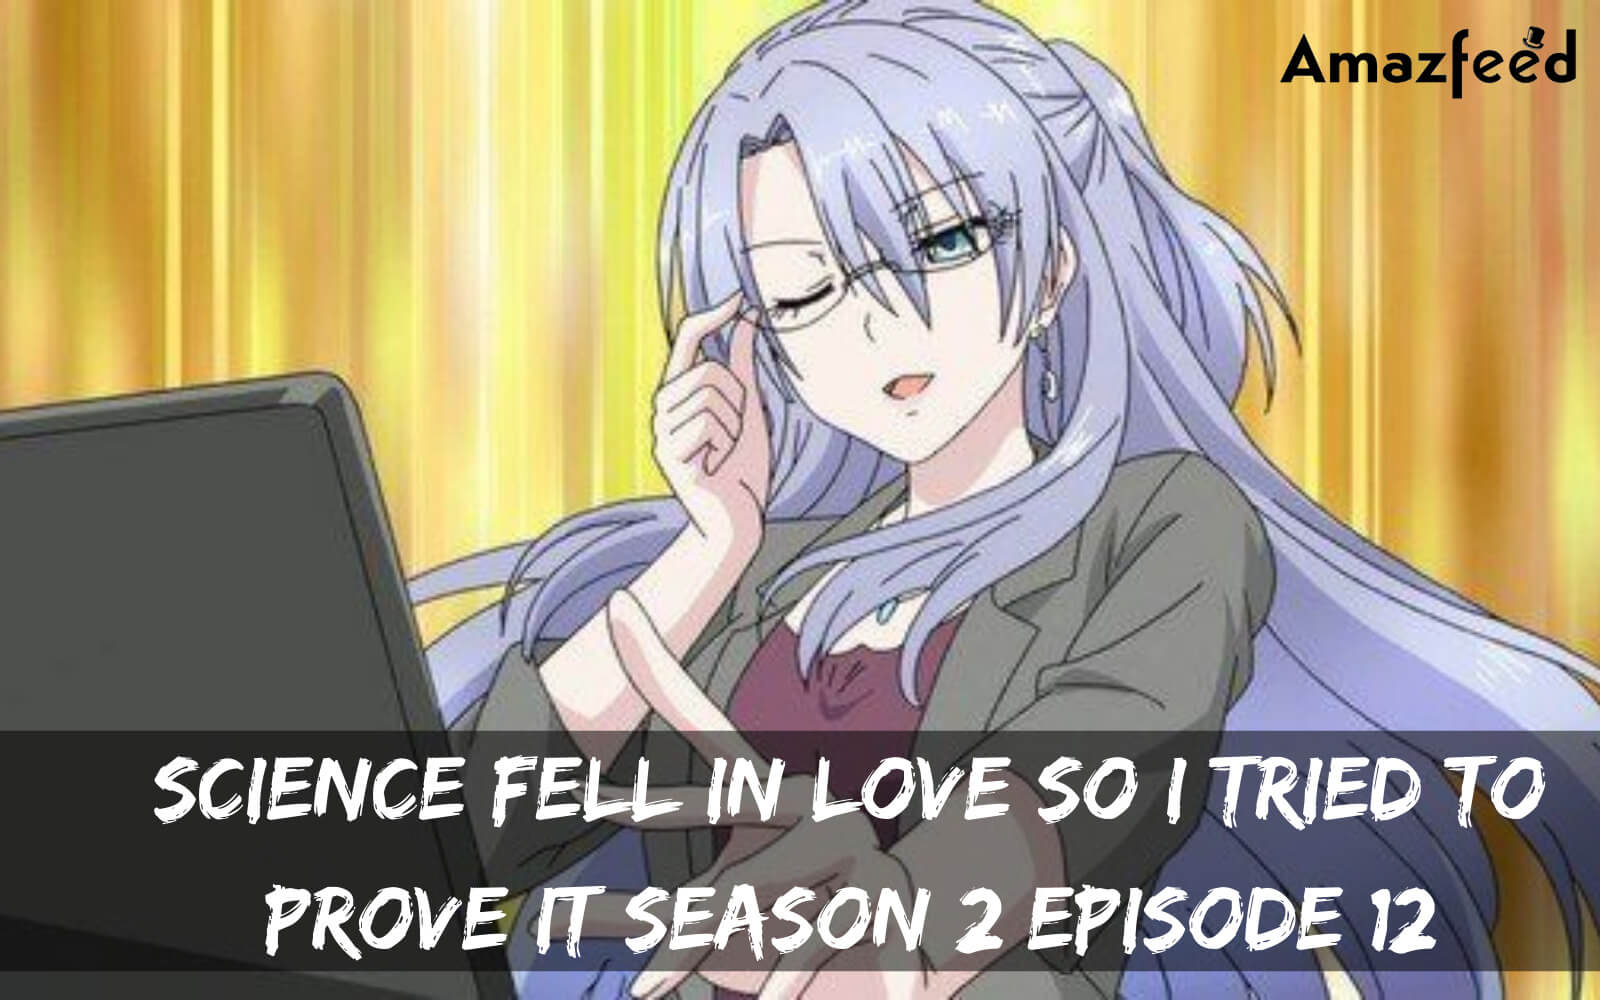 Science Fell In Love So I Tried To Prove It Season 2 Episode 12 release date